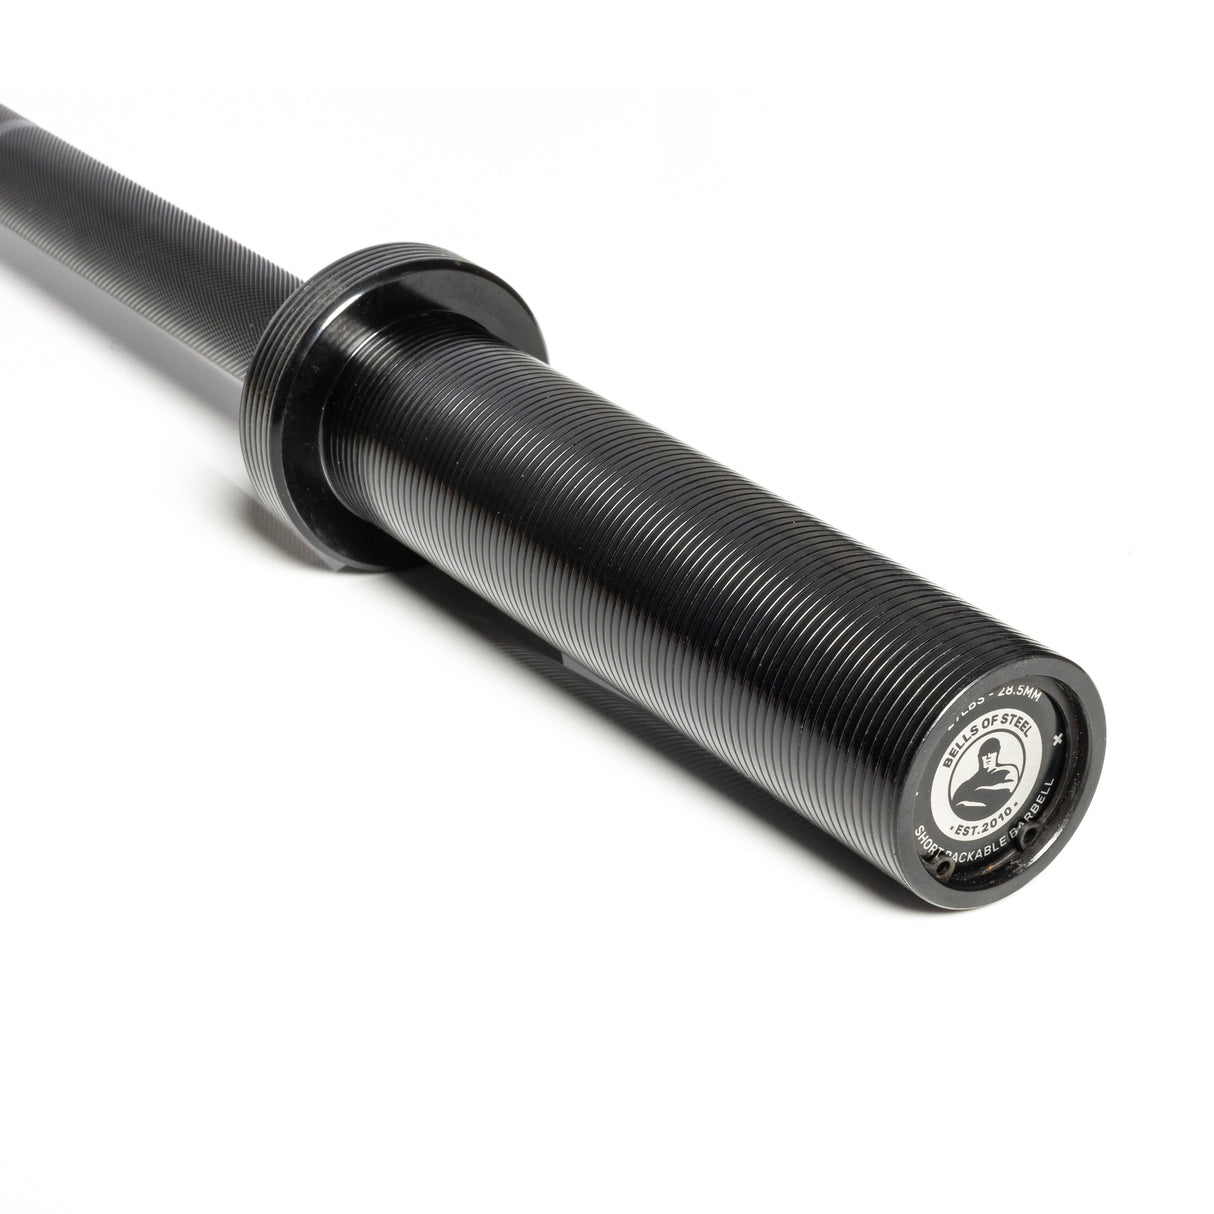 Black short rackable barbell with knurled grip and smooth ends